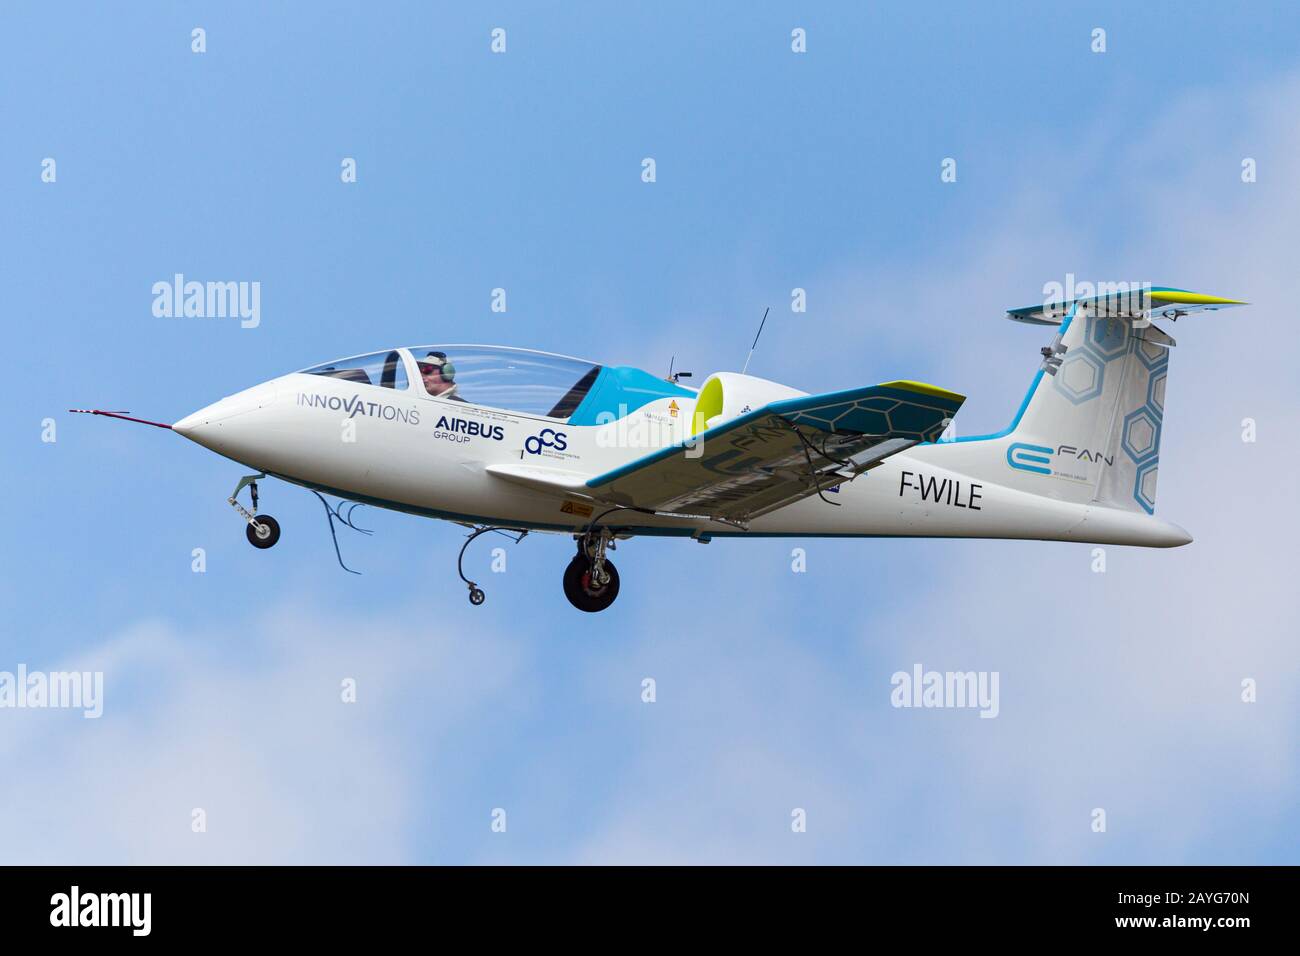 Farnborough, UK - July 15, 2014: Airbus flies the E-Fan at the Farnborough Int'l Airshow, a prototype all-electric aircraft used as a technology demon Stock Photo